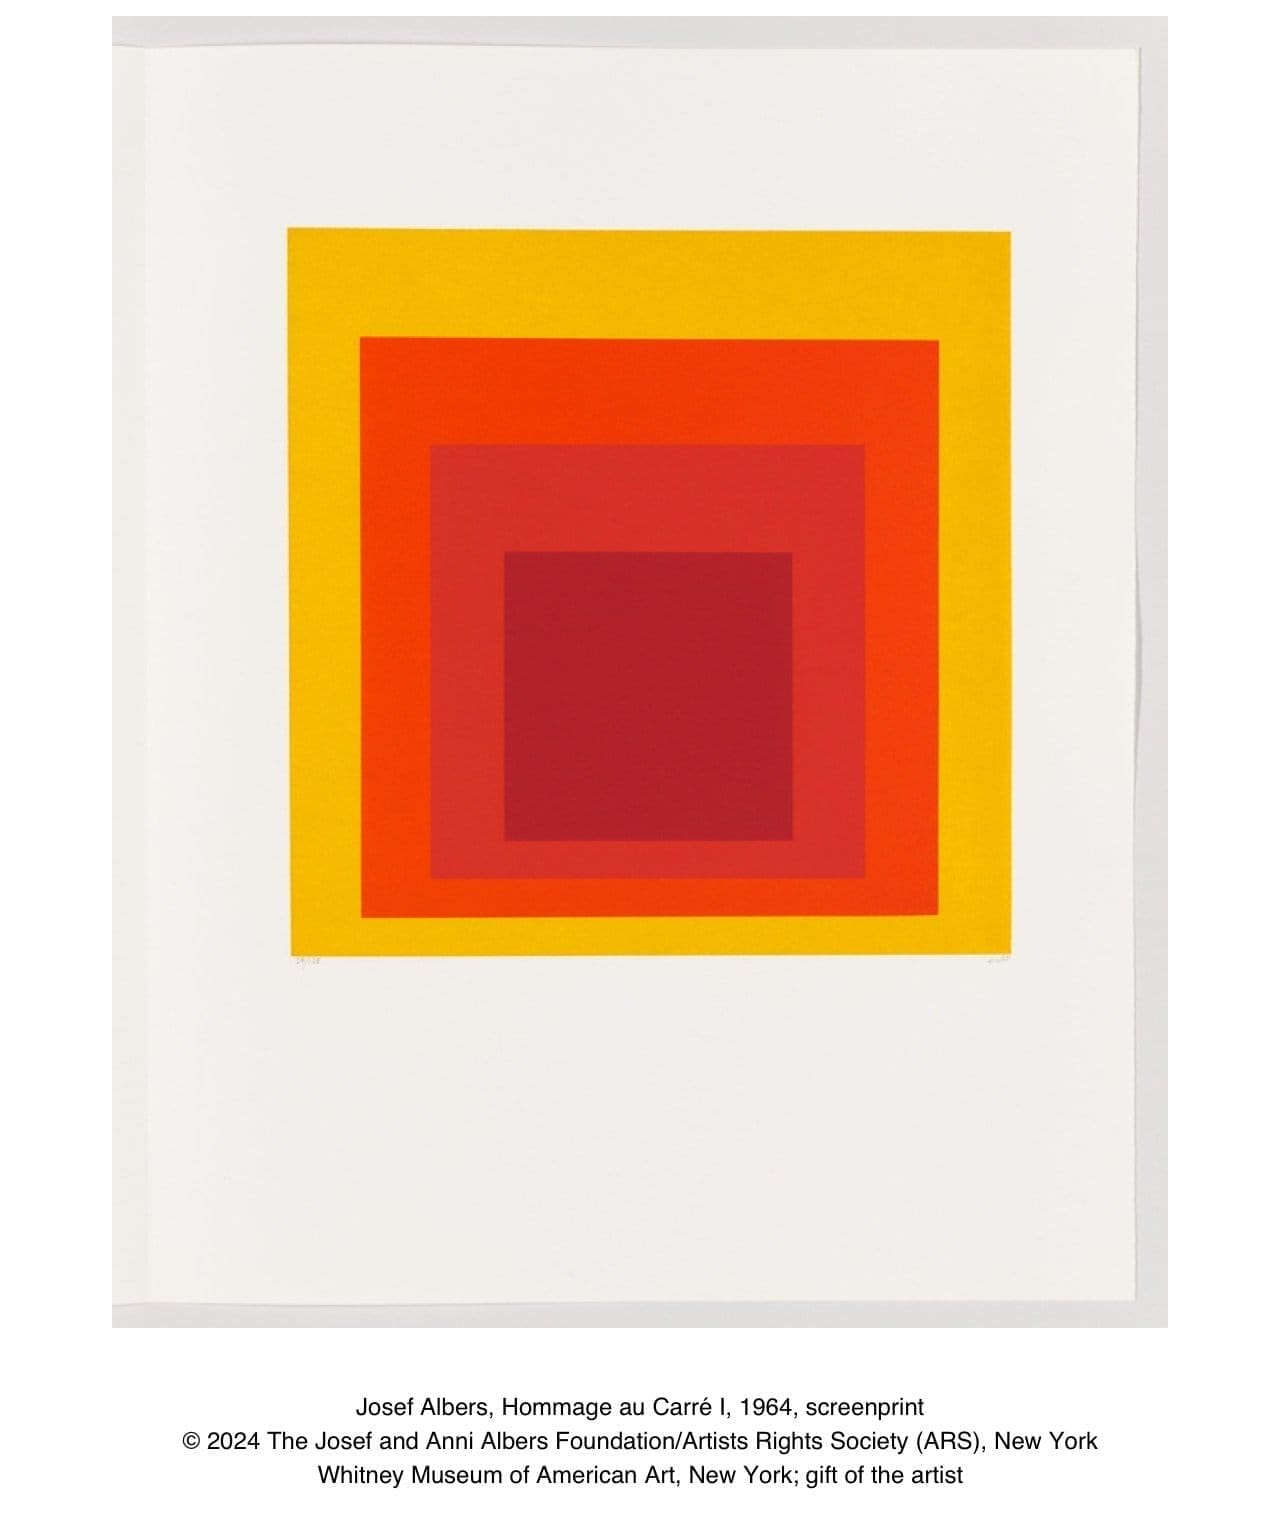 Pictured: Work by Josef Albers, Hommage au Carre I, 1964, screenprint. Copyright: The Josef and anni Albers Foundation/Artists Rights Society (ARS), New York On view at: Whitney Museum of American Art, New York; gift of the artist.